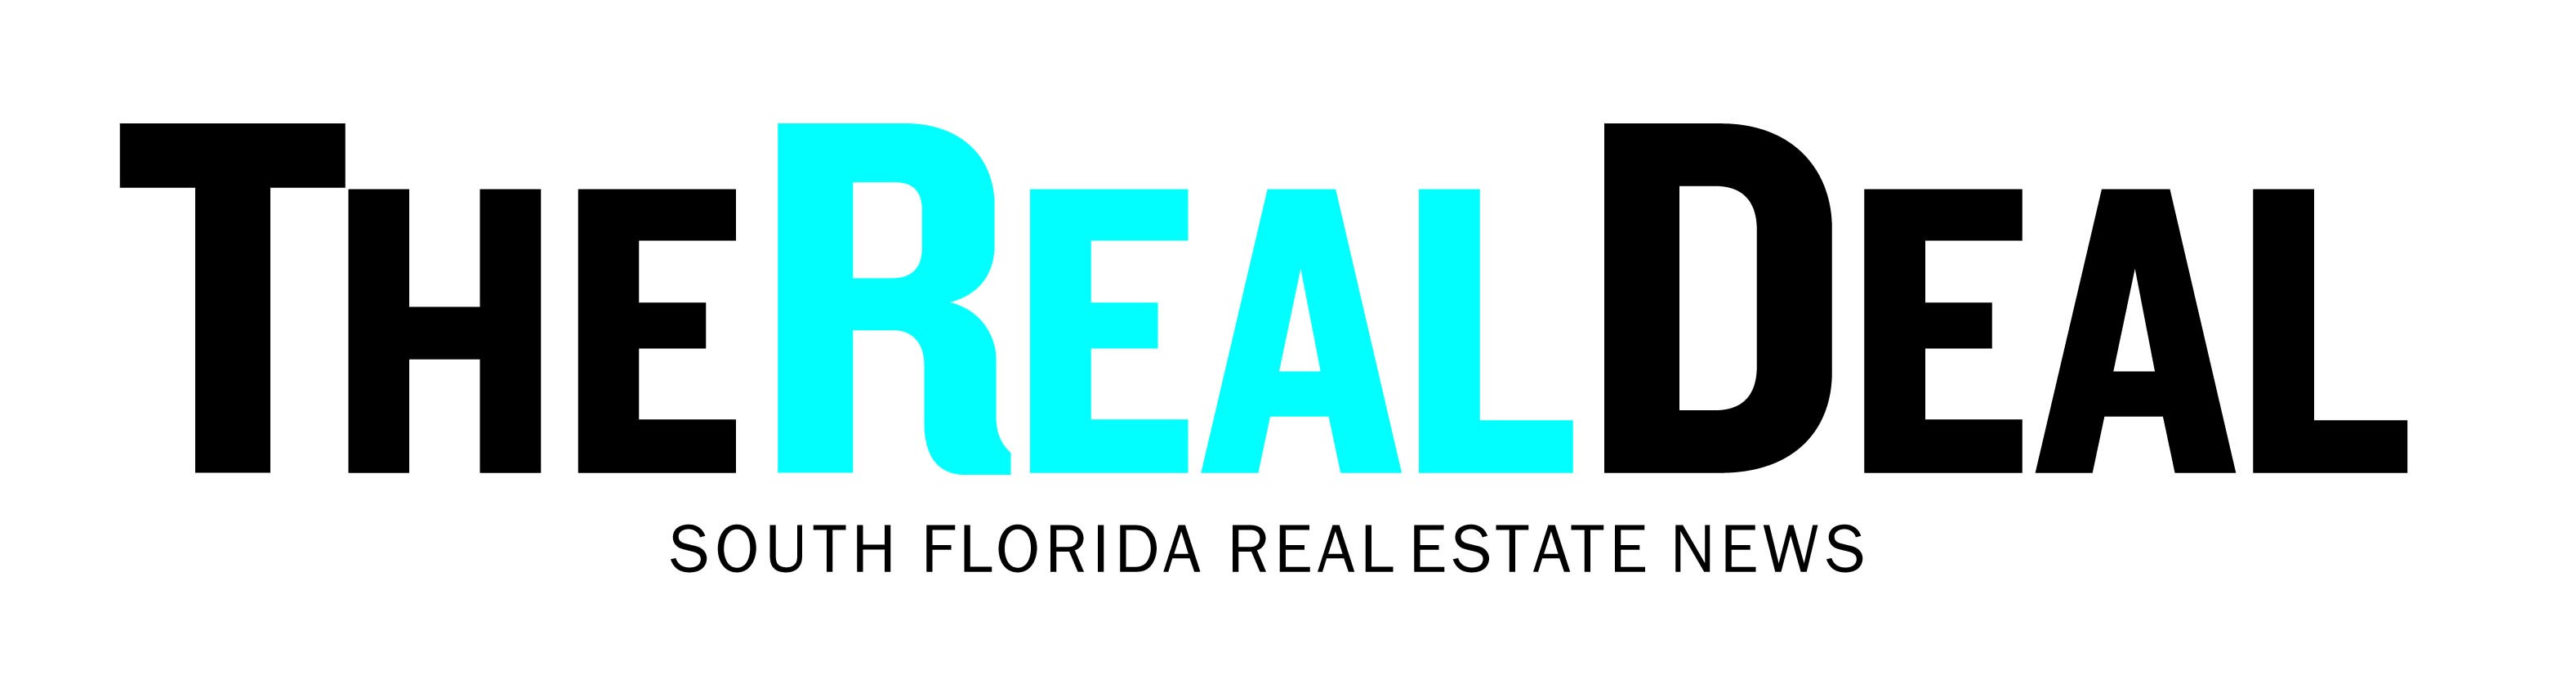 A text banner displaying South Florida Real Estate News